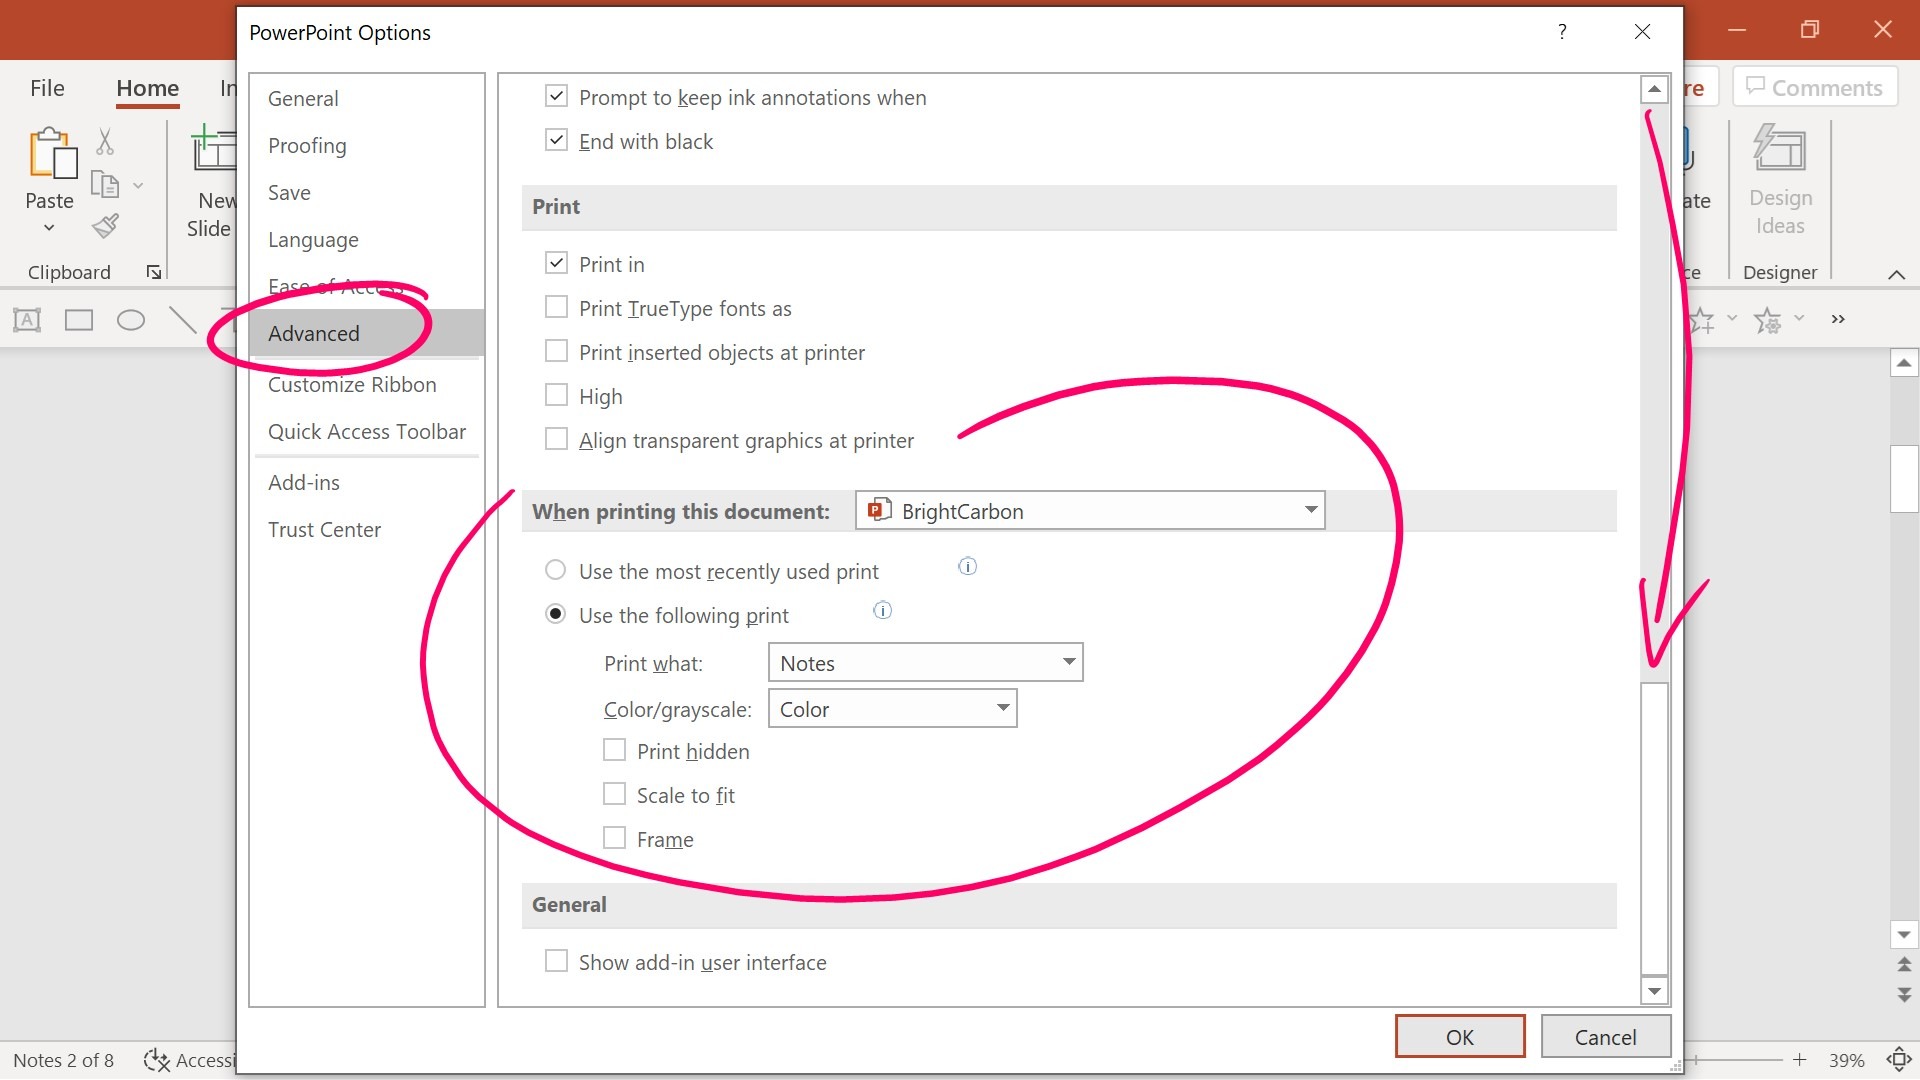 Screenshot of the PowerPoint Options pop up window. "Advanced" is selected from the left hand menu. An arrow annotation shows you must scroll to the bottom of the Advanced options to find the "When printing this document:" options. "Use the following print" is selected. 